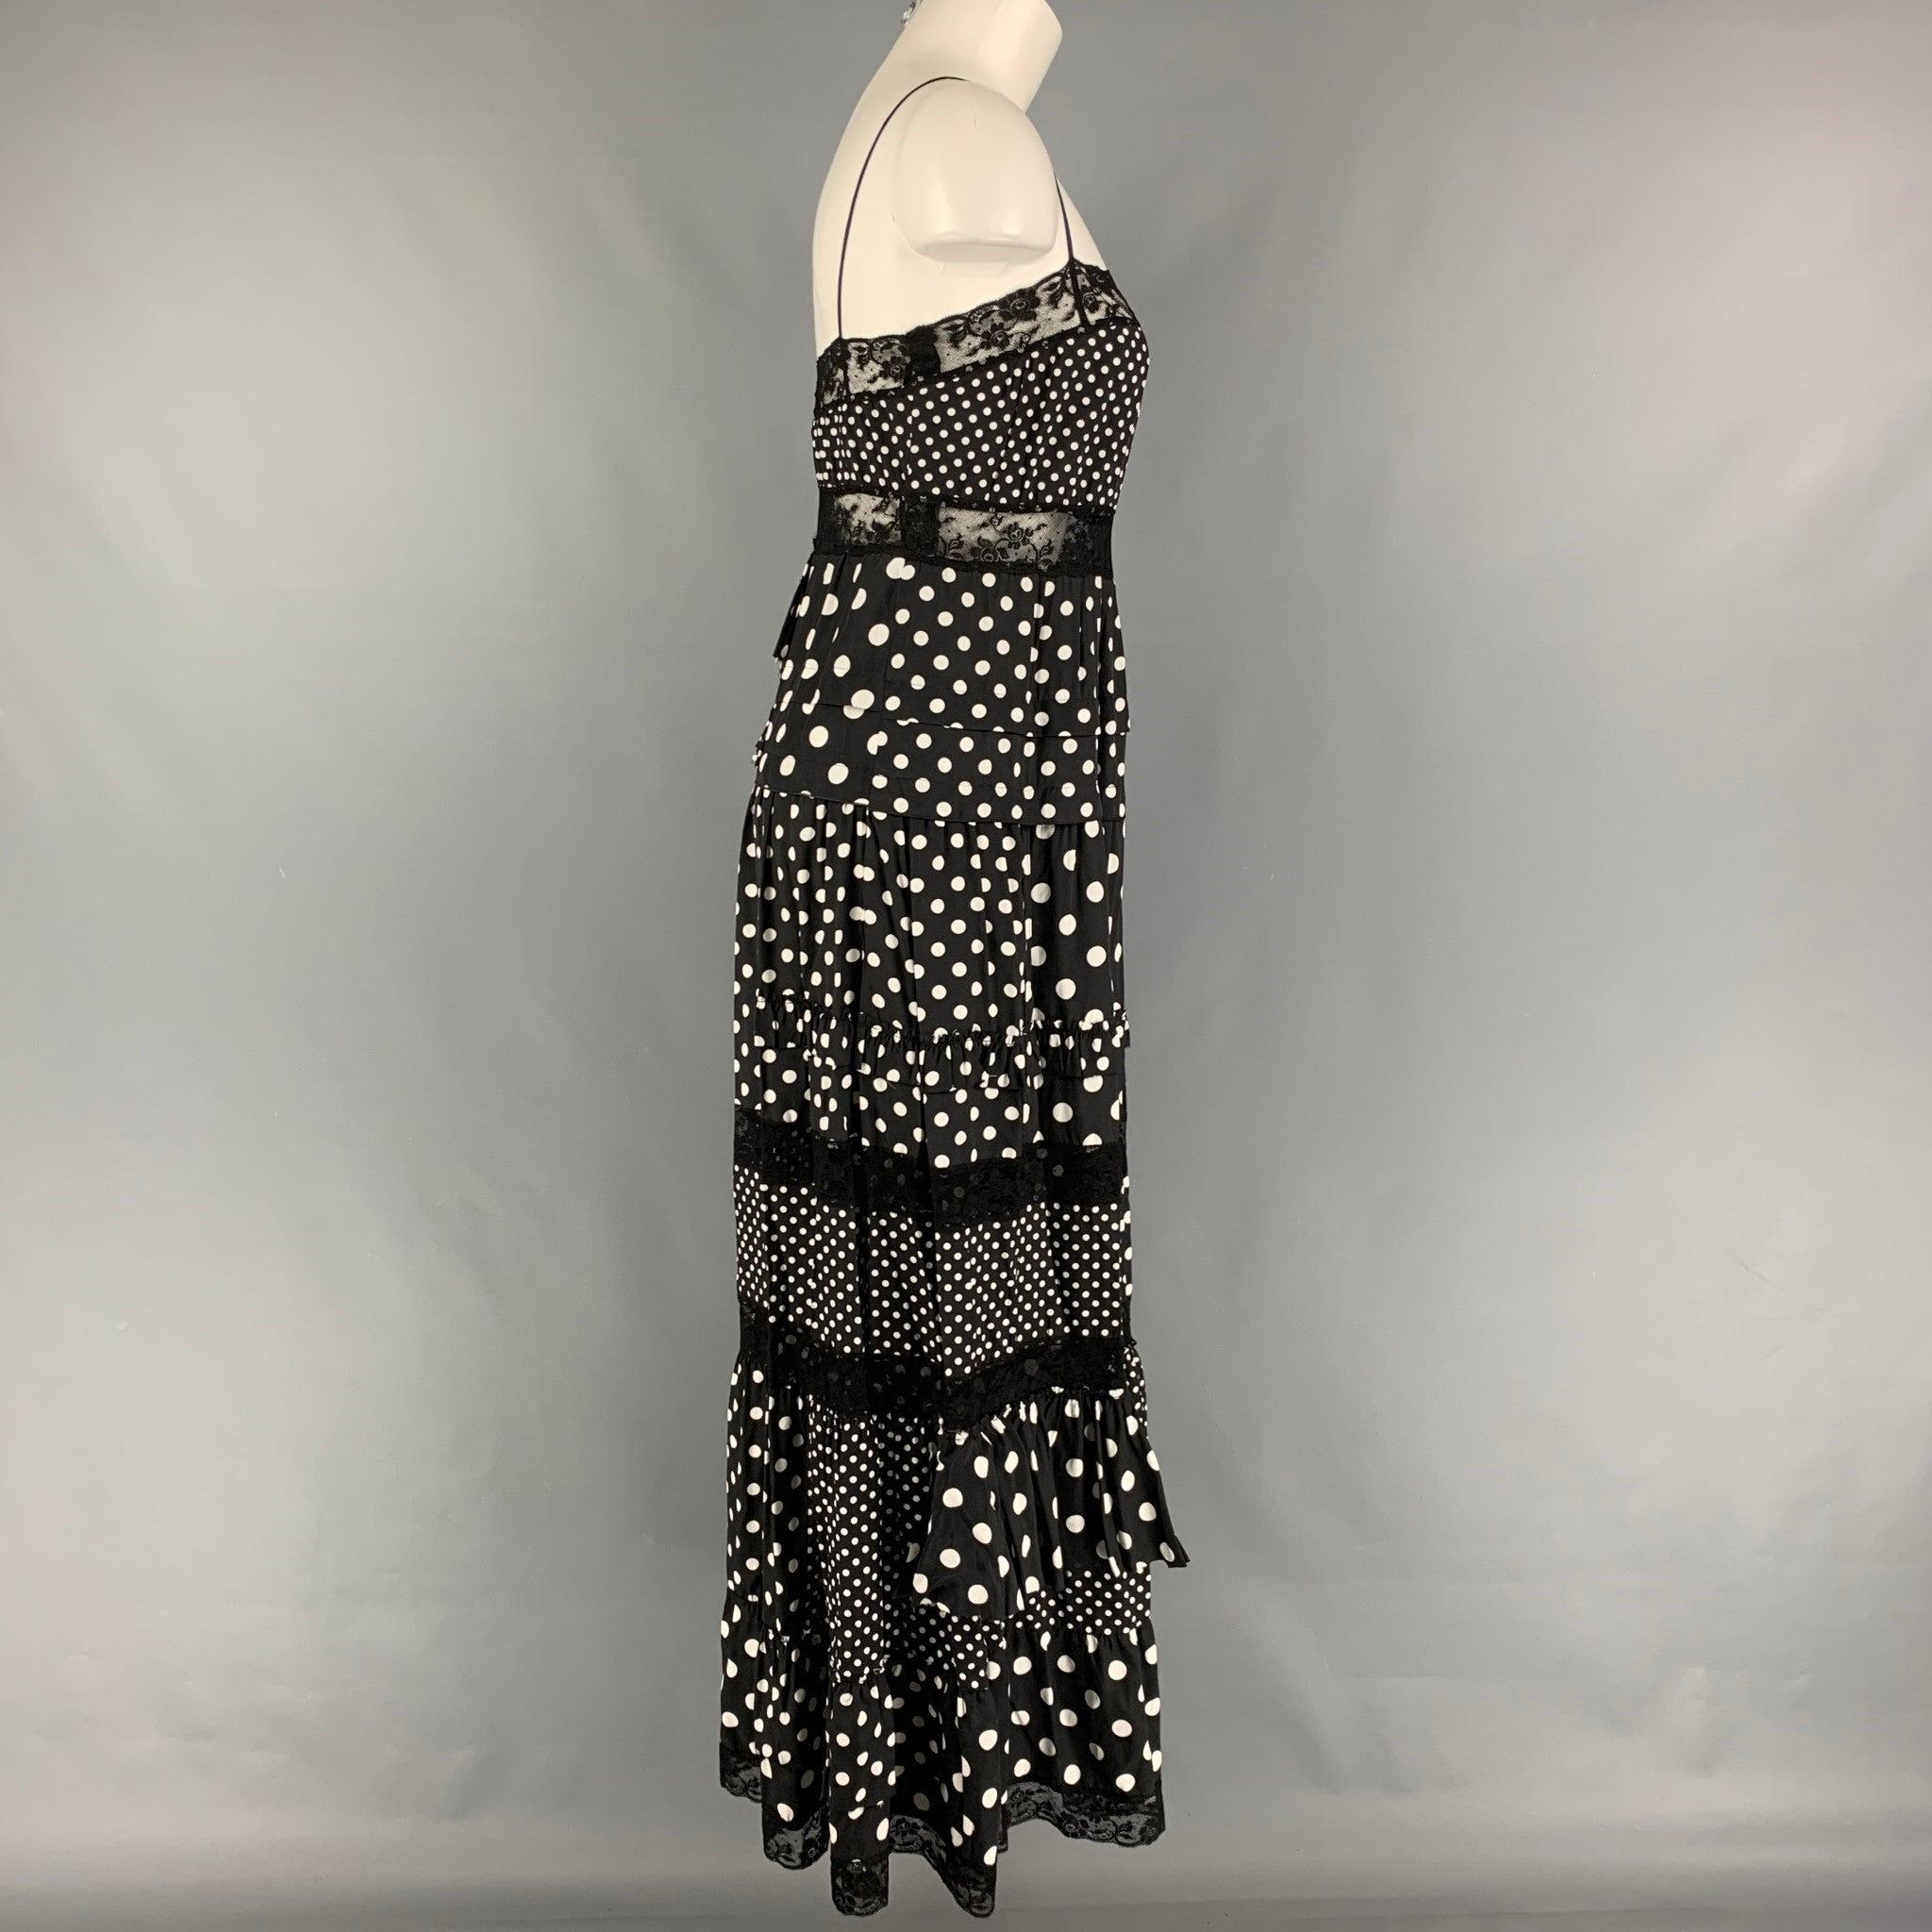 MARC by MARC JACOBS dress comes in a black & white polka dot viscose featuring a ruffled style, lace trim, and spaghetti straps.
Very Good
Pre-Owned Condition. 

Marked:   2 

Measurements: 
  Bust: 30 inches  Waist: 30 inches  Hip: 40 inches 